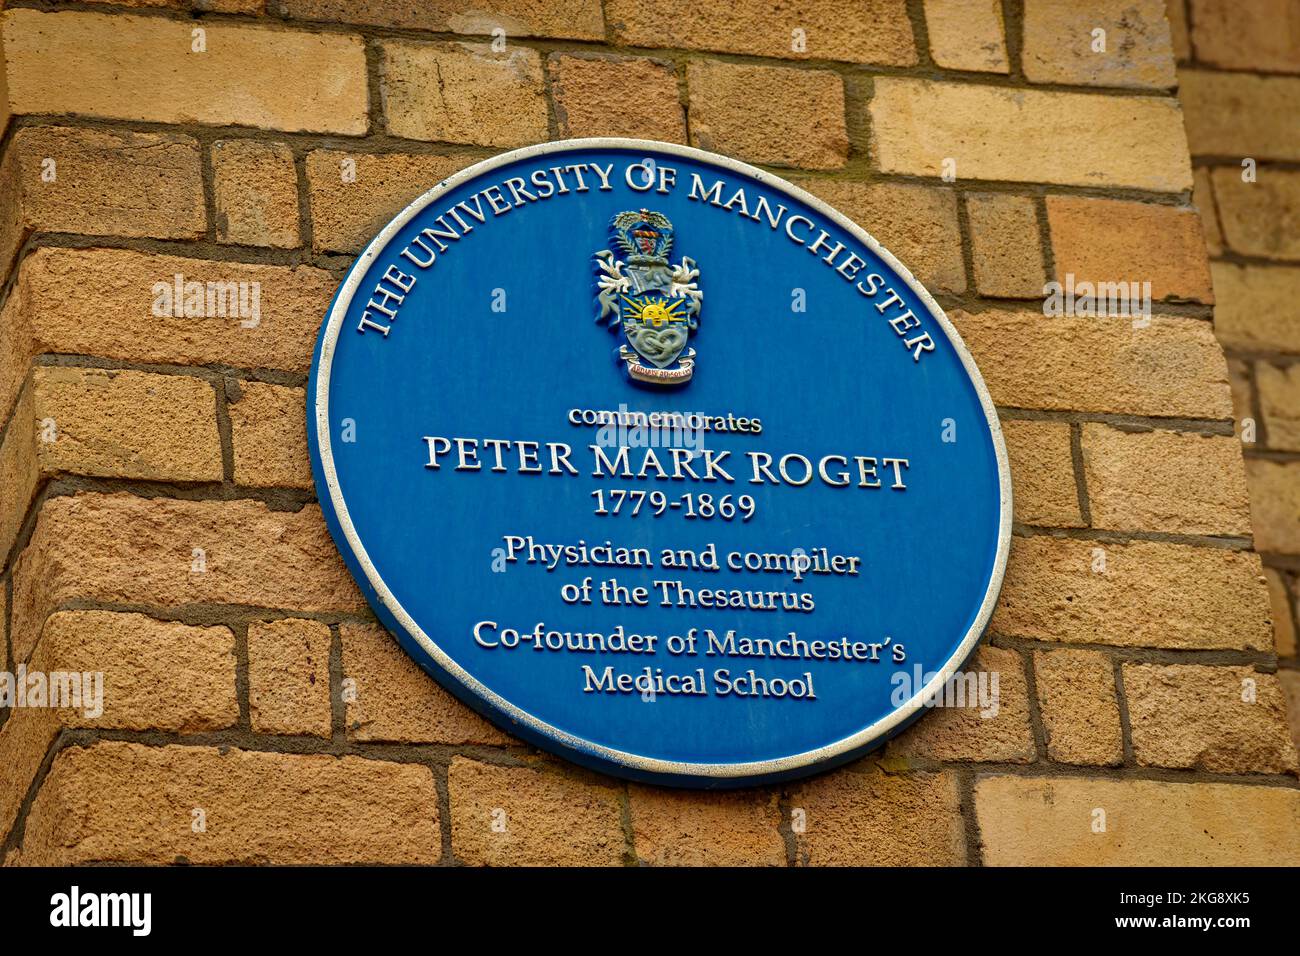 Blue Plate in Manchester University celebrating work carried out there by Peter Mark Roget, Physician and compiler of Roget's Thesaurus. Stock Photo